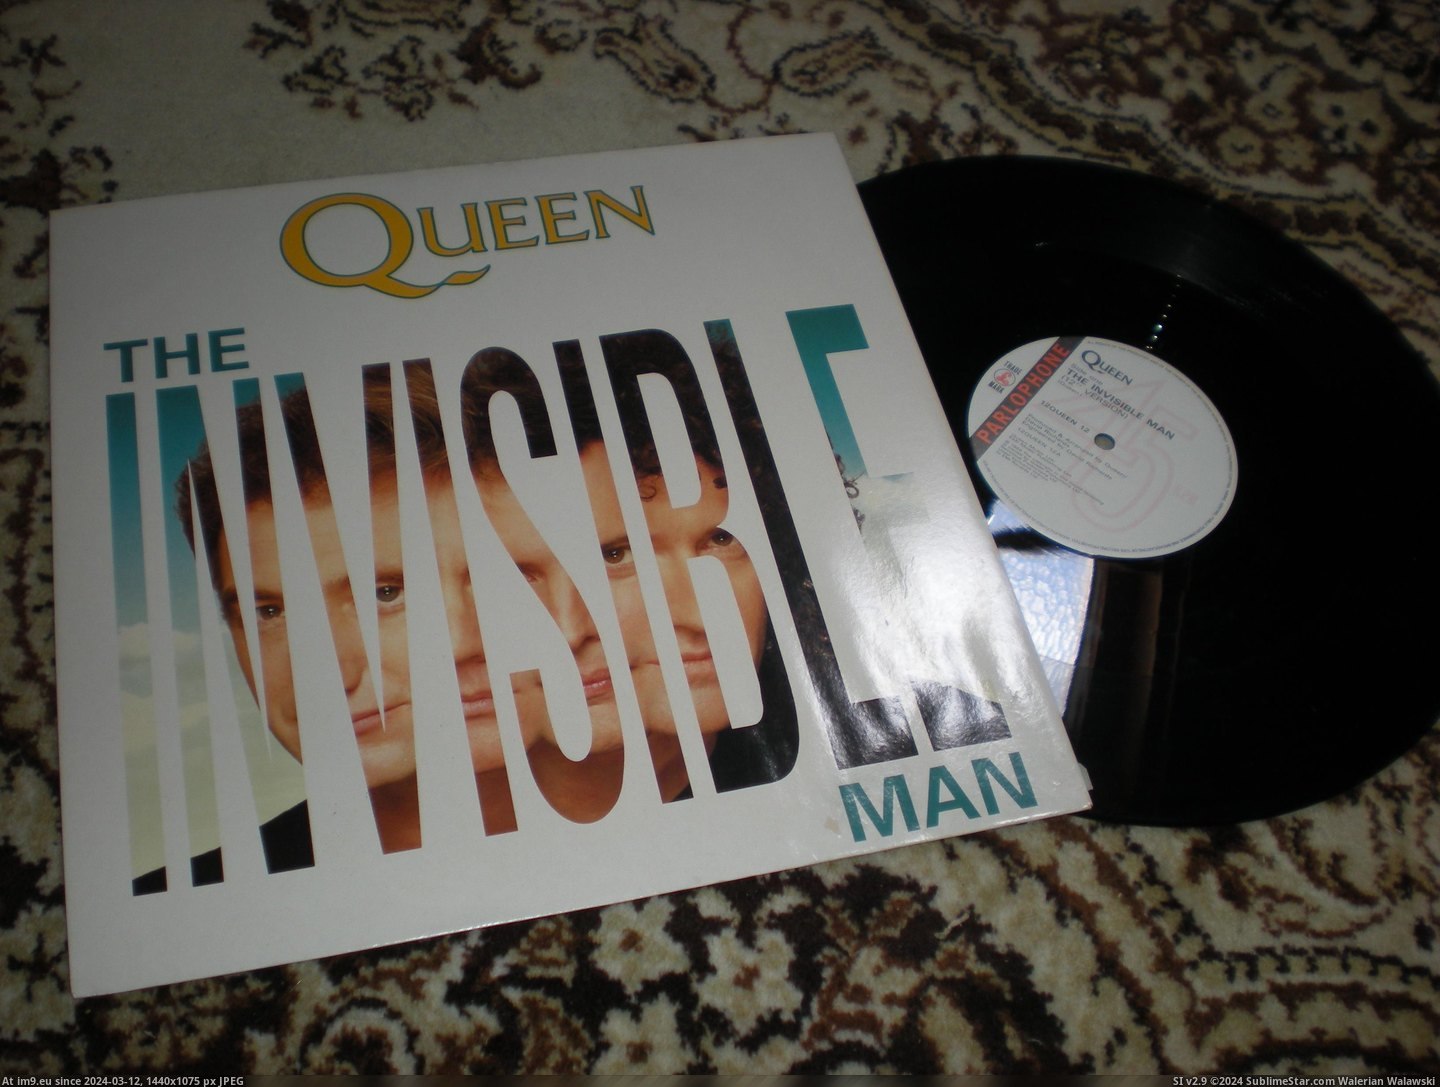 #Man #Invisible #Queen QUEEN Invisible Man Pic. (Image of album new 1))